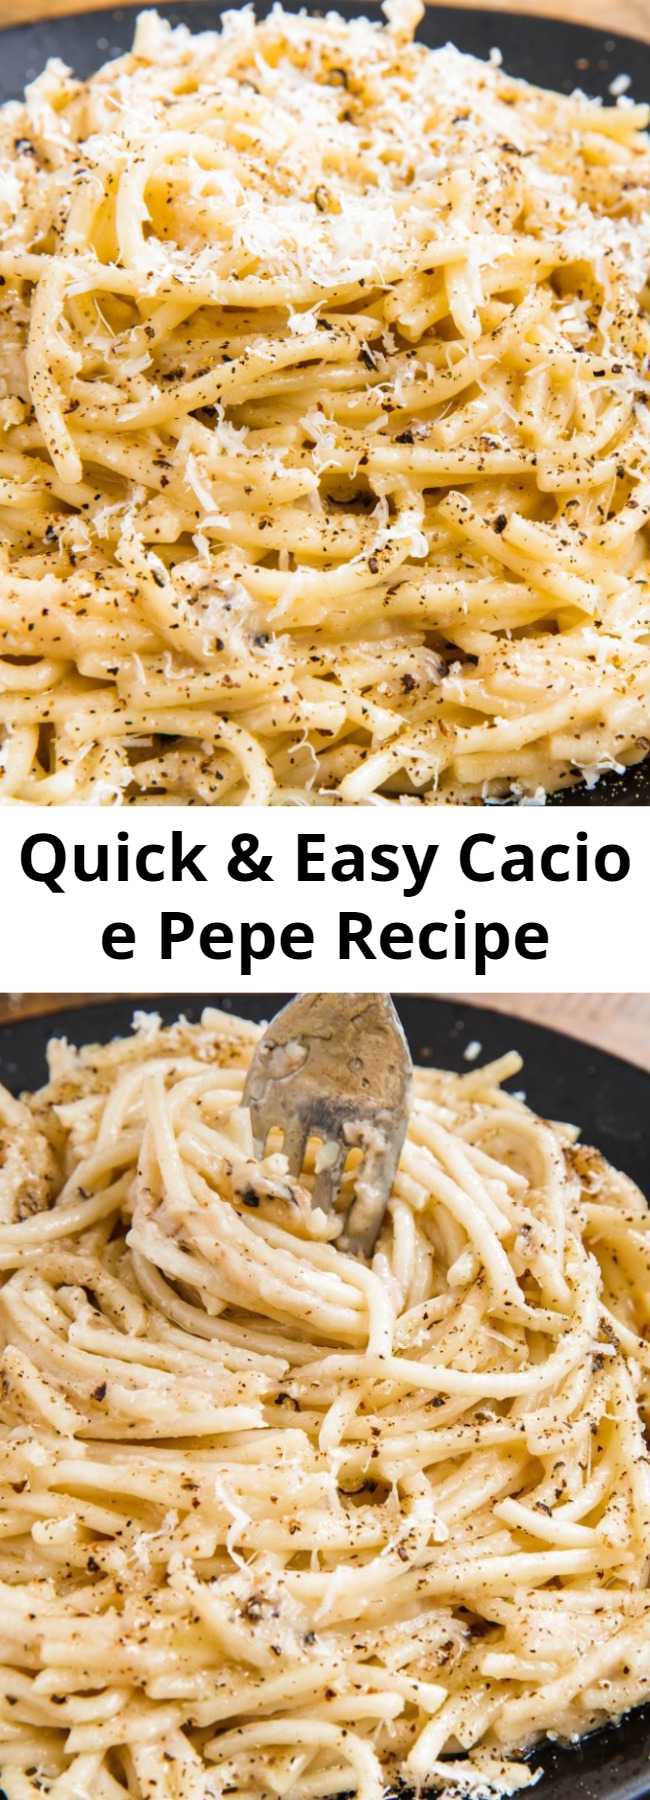 Quick & Easy Cacio e Pepe Recipe - Cacio e pepe literally translates to “cheese and pepper,” and while those are the prominent flavors here, this dish is SO much more. It’s transformative. And what makes it so perfect? Its simplicity. #easy #recipe #pasta #cacio #pepe #cheese #pepper #dinner #meals #authentic